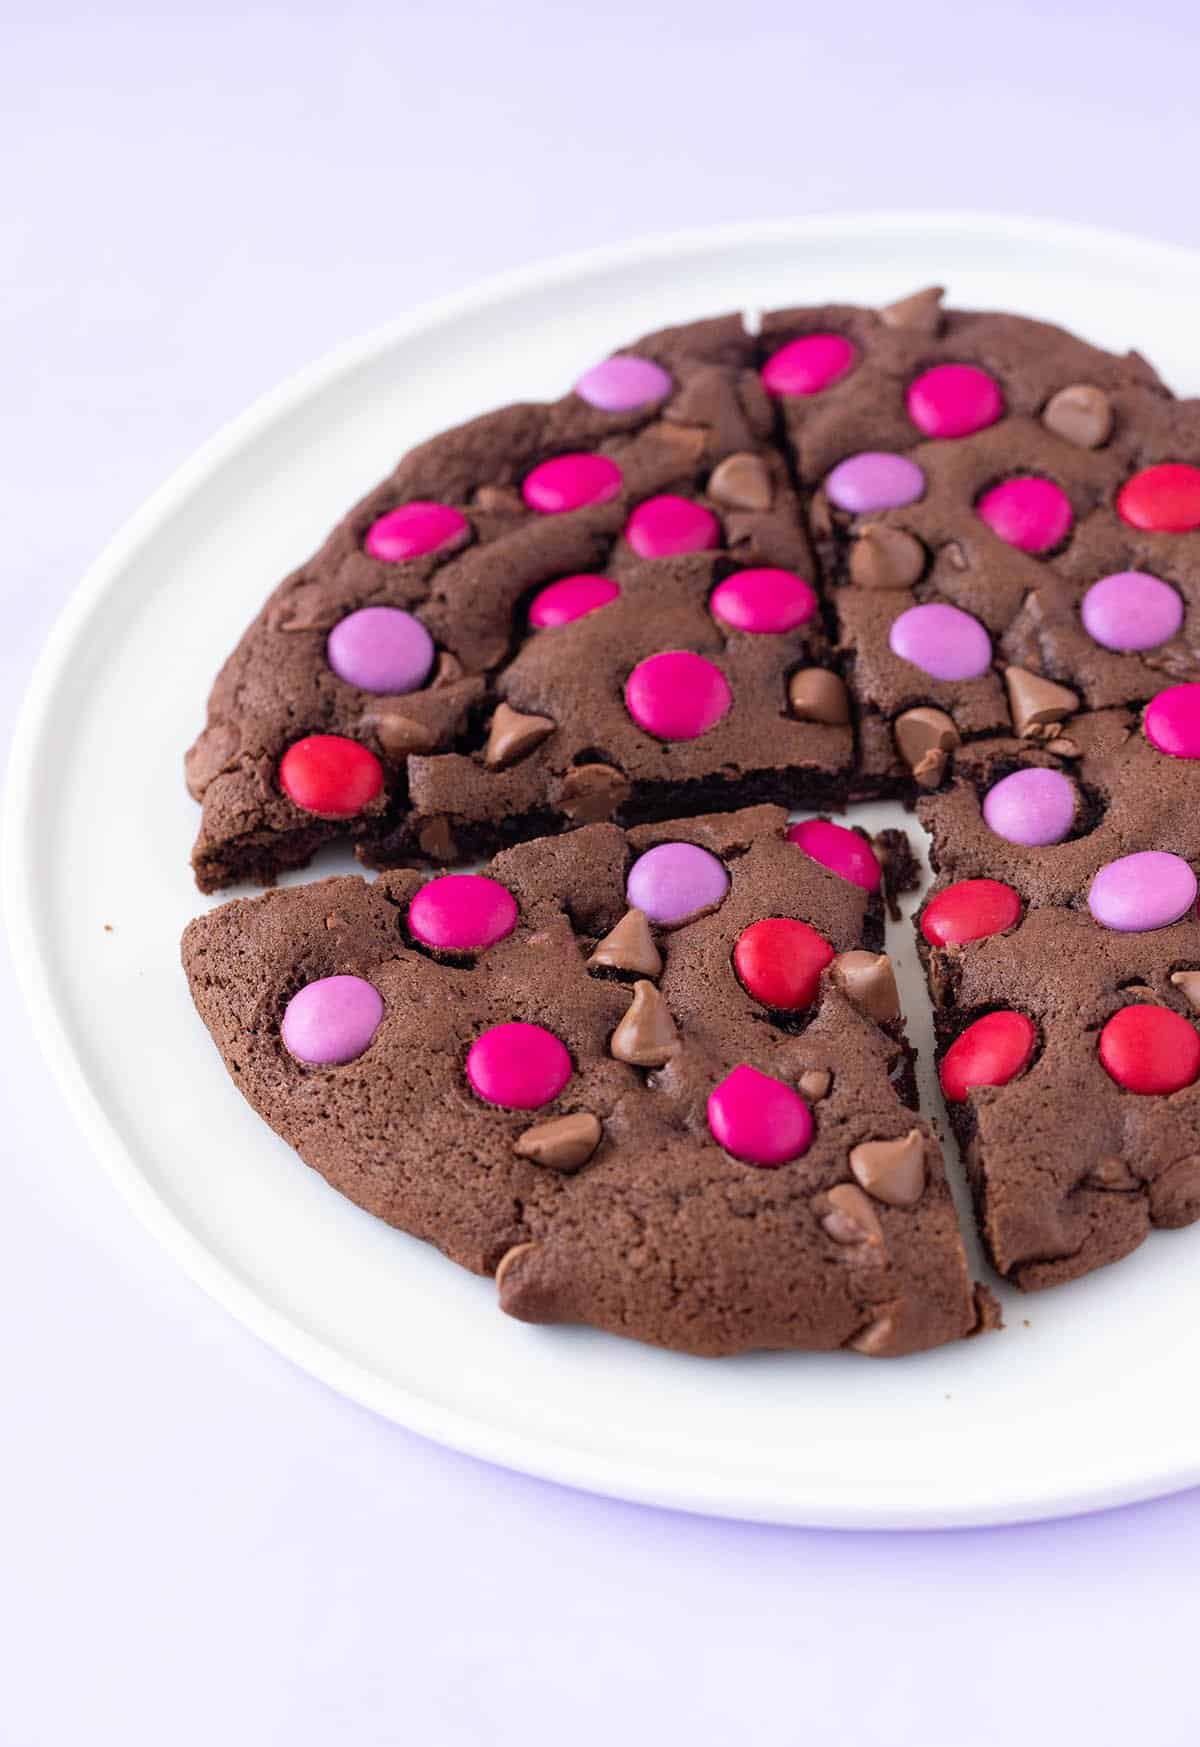 A beautiful chocolate cookie cut into slices.